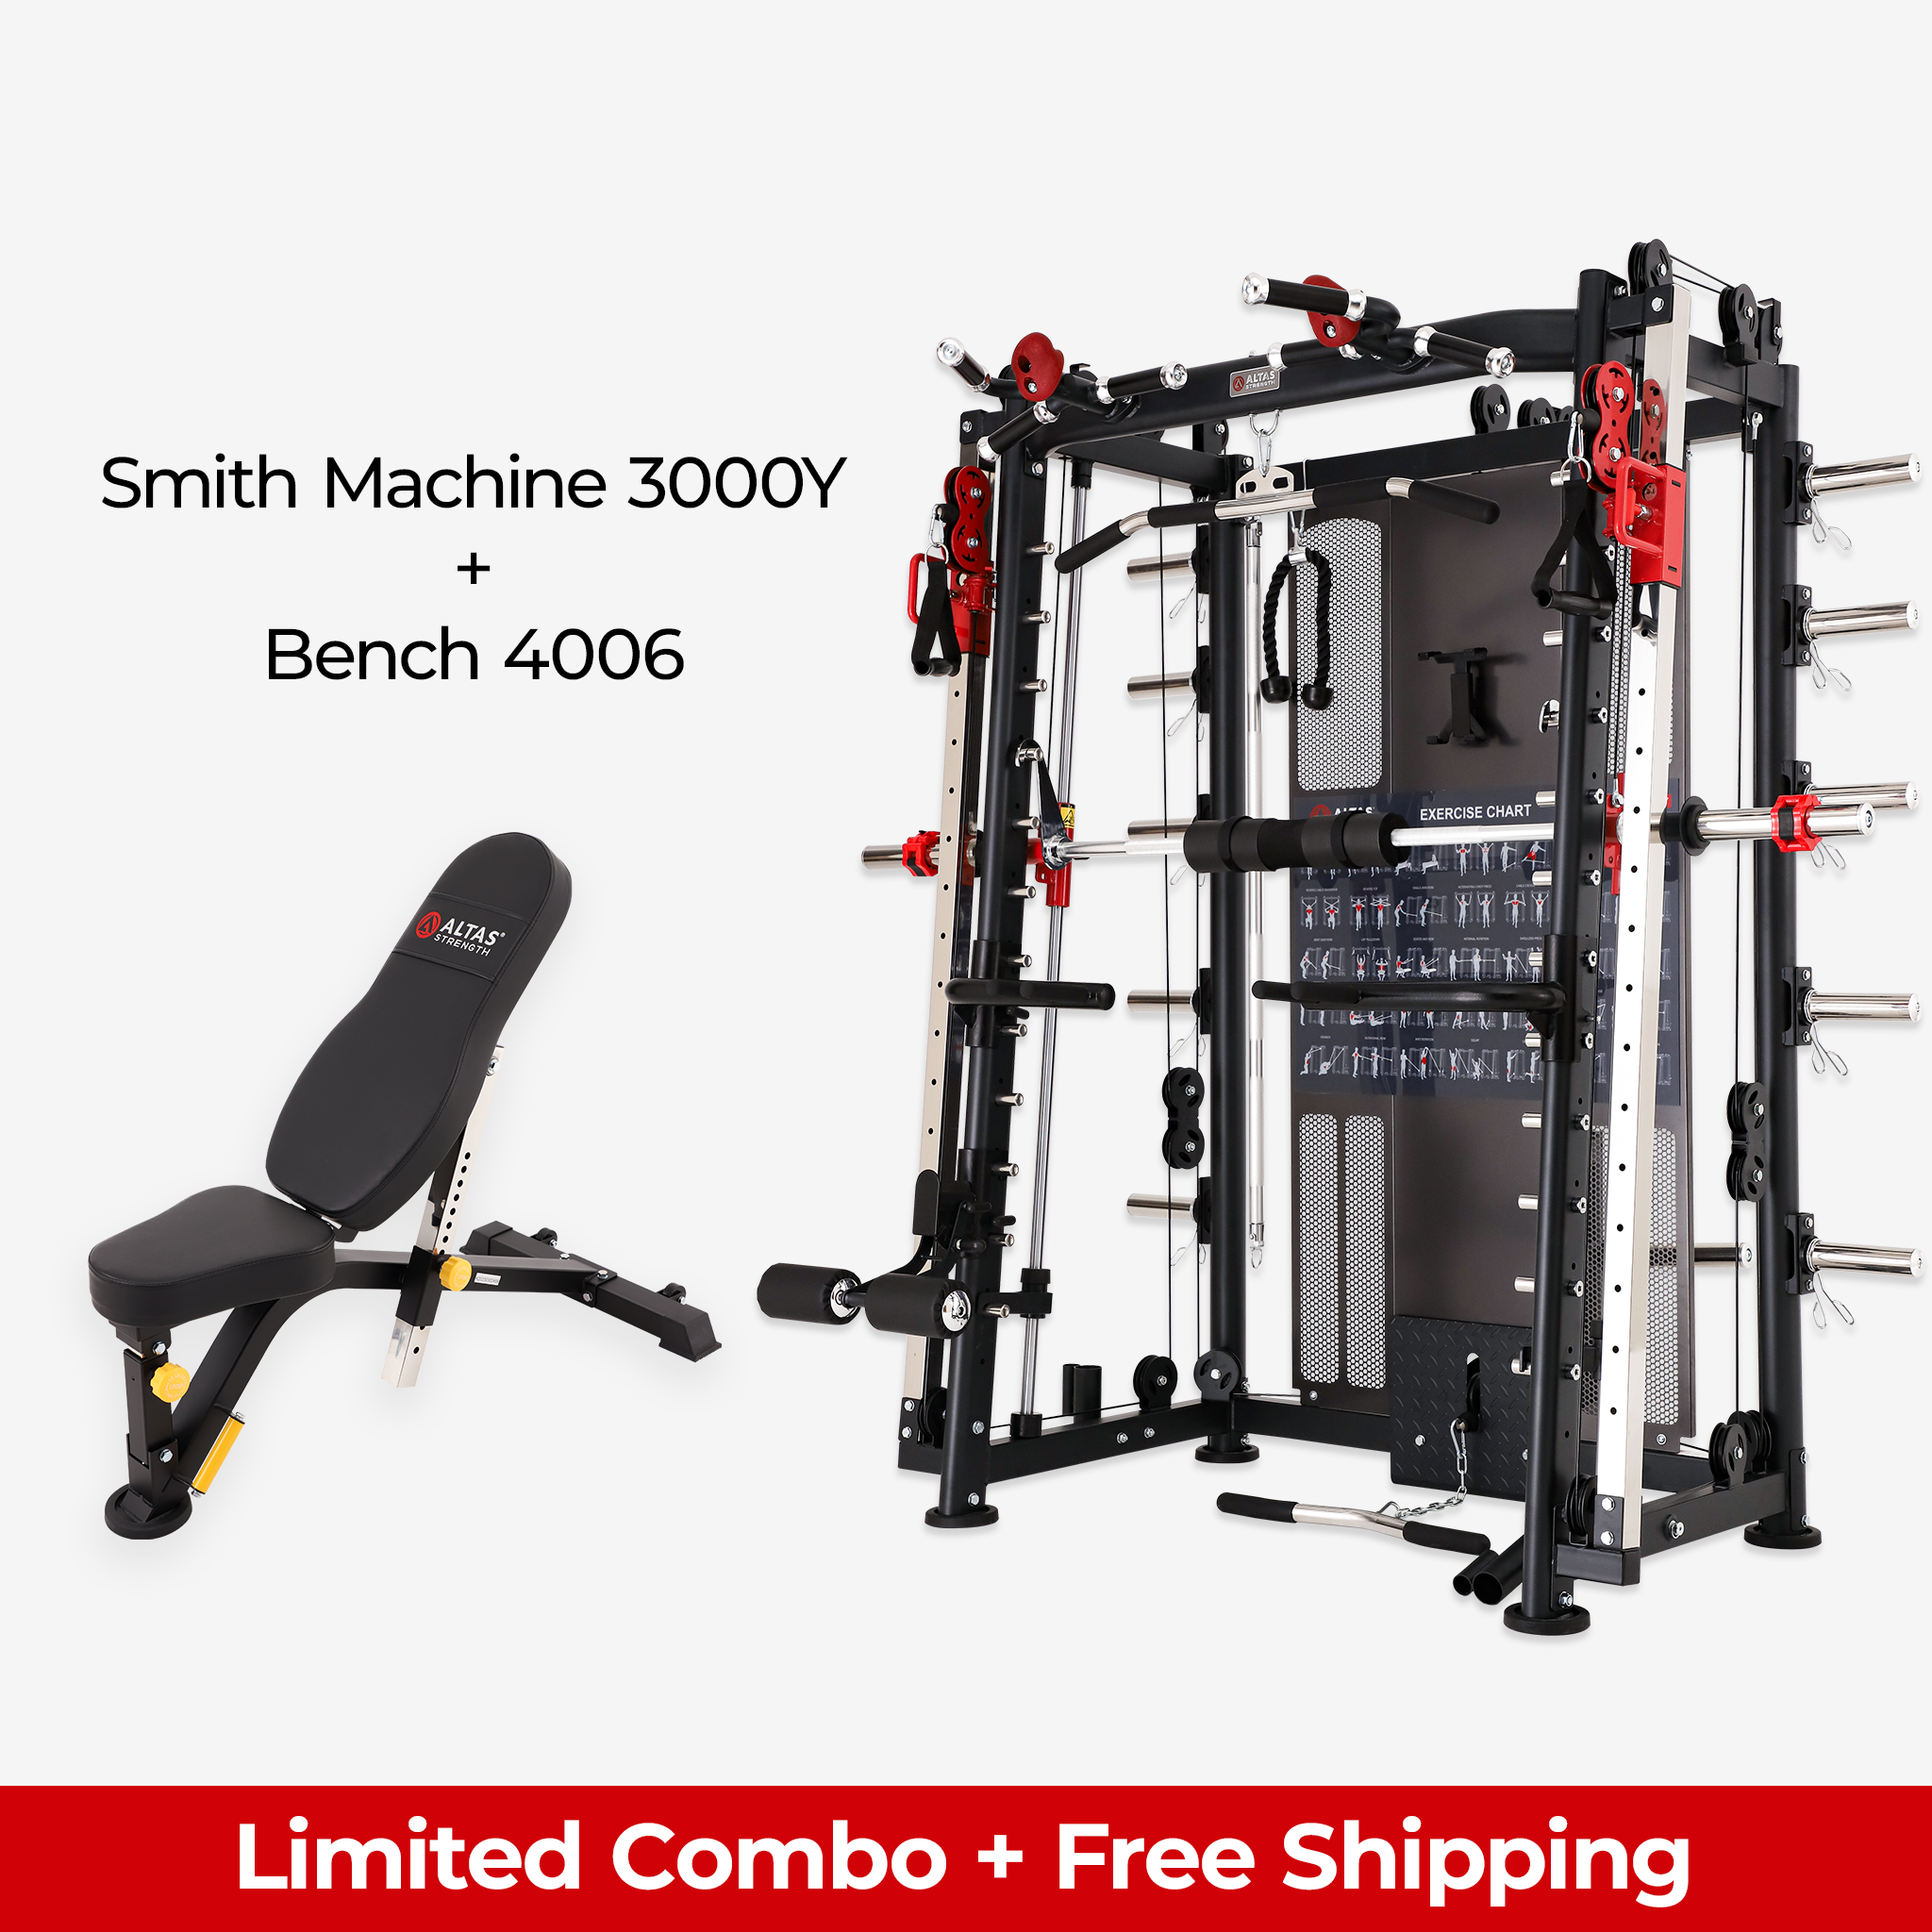 Limited Combo - Smith Machine AL-3000Y + Bench 4006